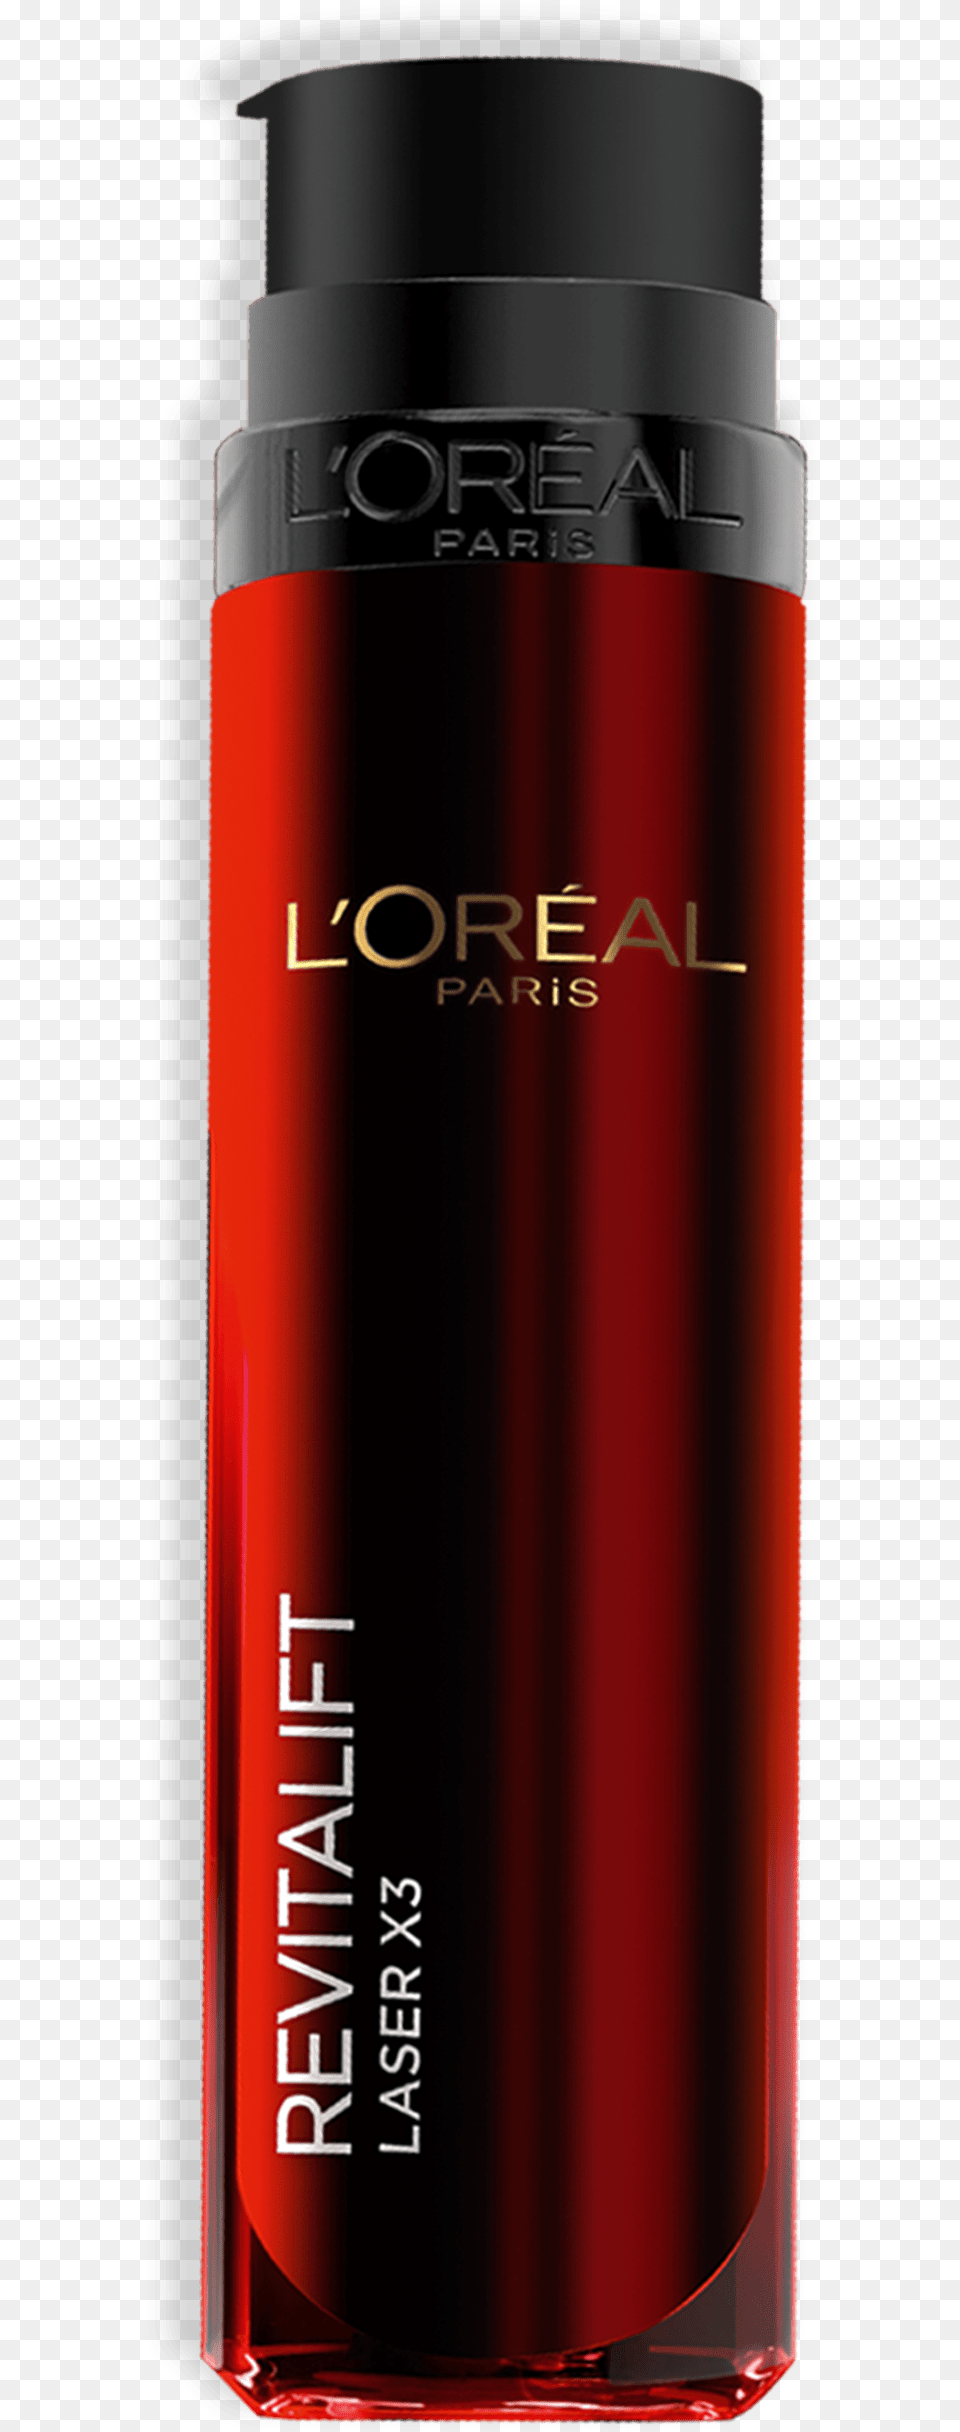 Look Younger And Stress With Loreal Paris Revitalift L39oral Revitalift, Cosmetics, Bottle, Perfume Free Png